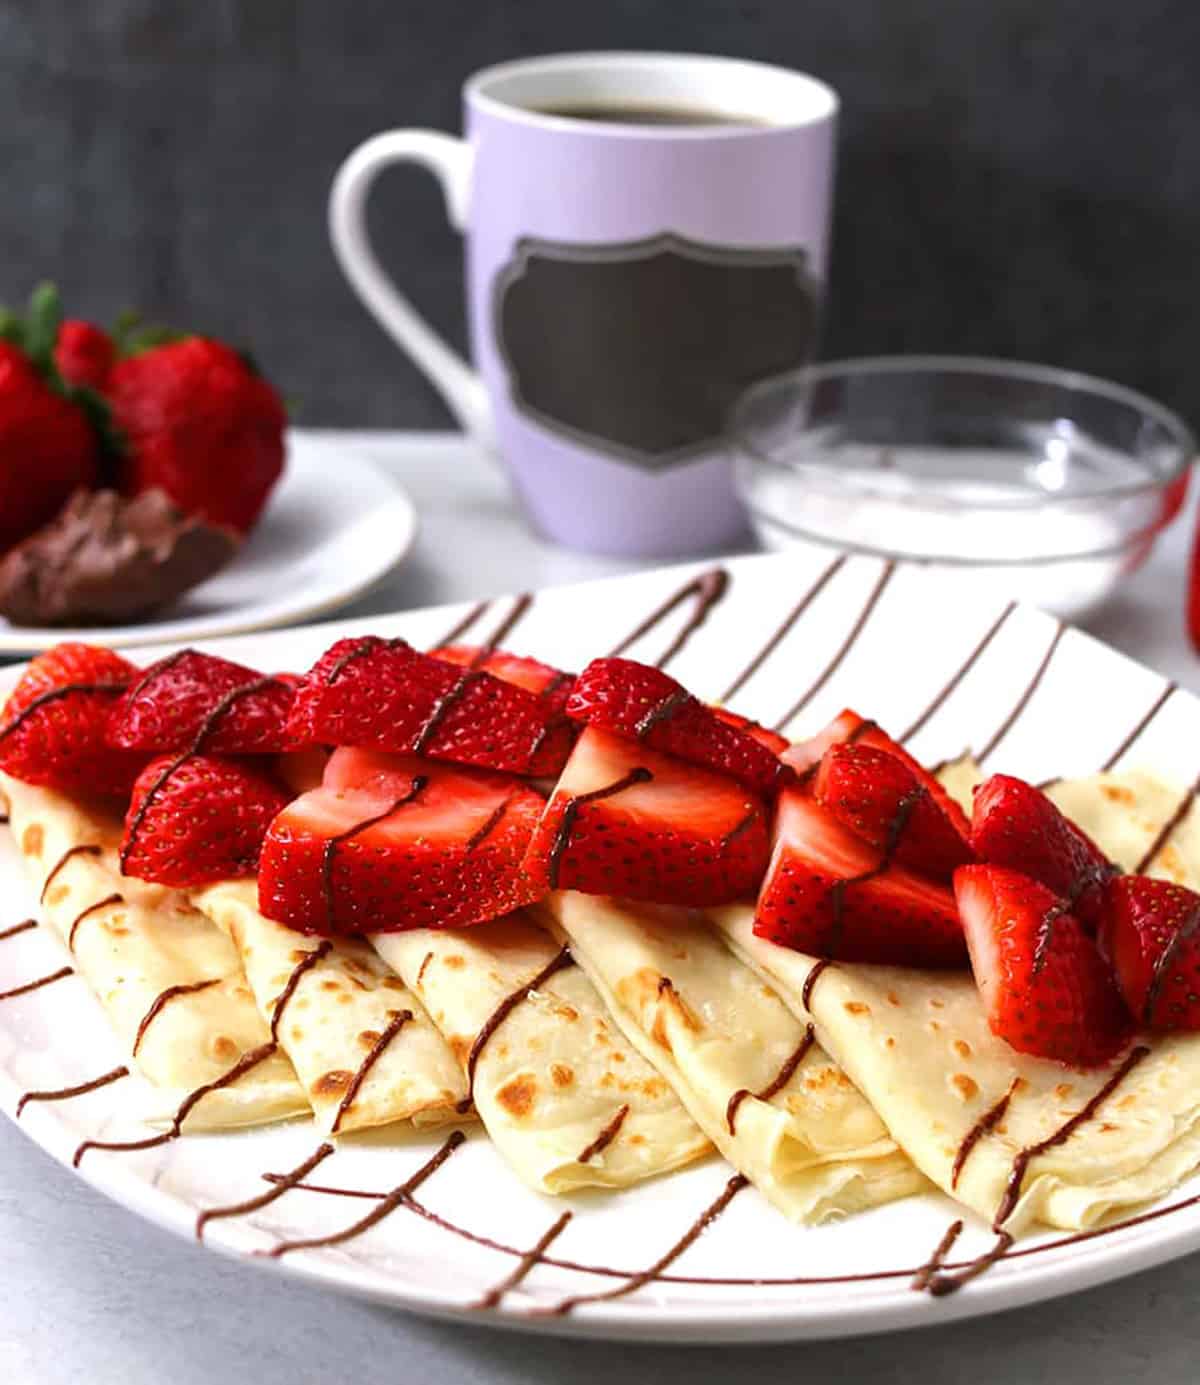 French Nutella Strawberry crepes on serving plate with coffee mug in background. 